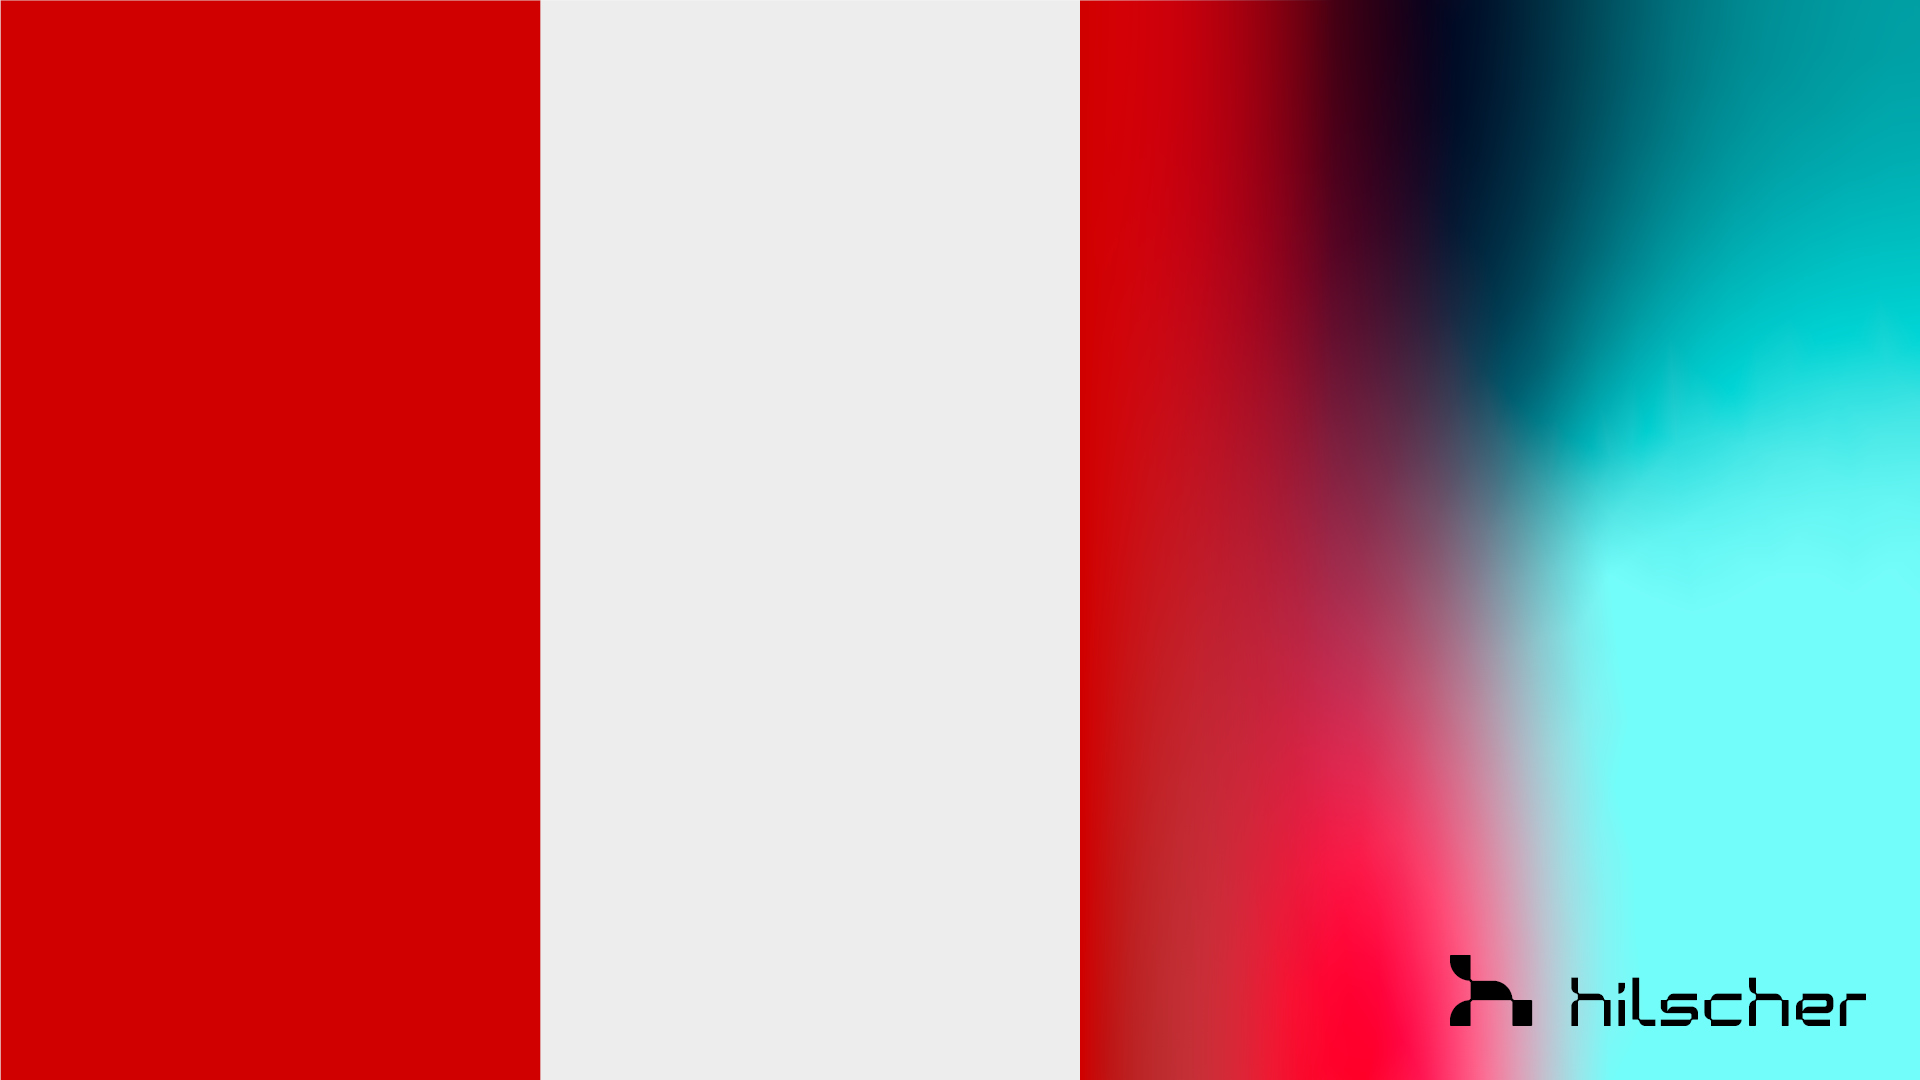 The flag of Austria. On the right side of the picture is a fade to a colorful space, accounting for nearly a quarter of the image.